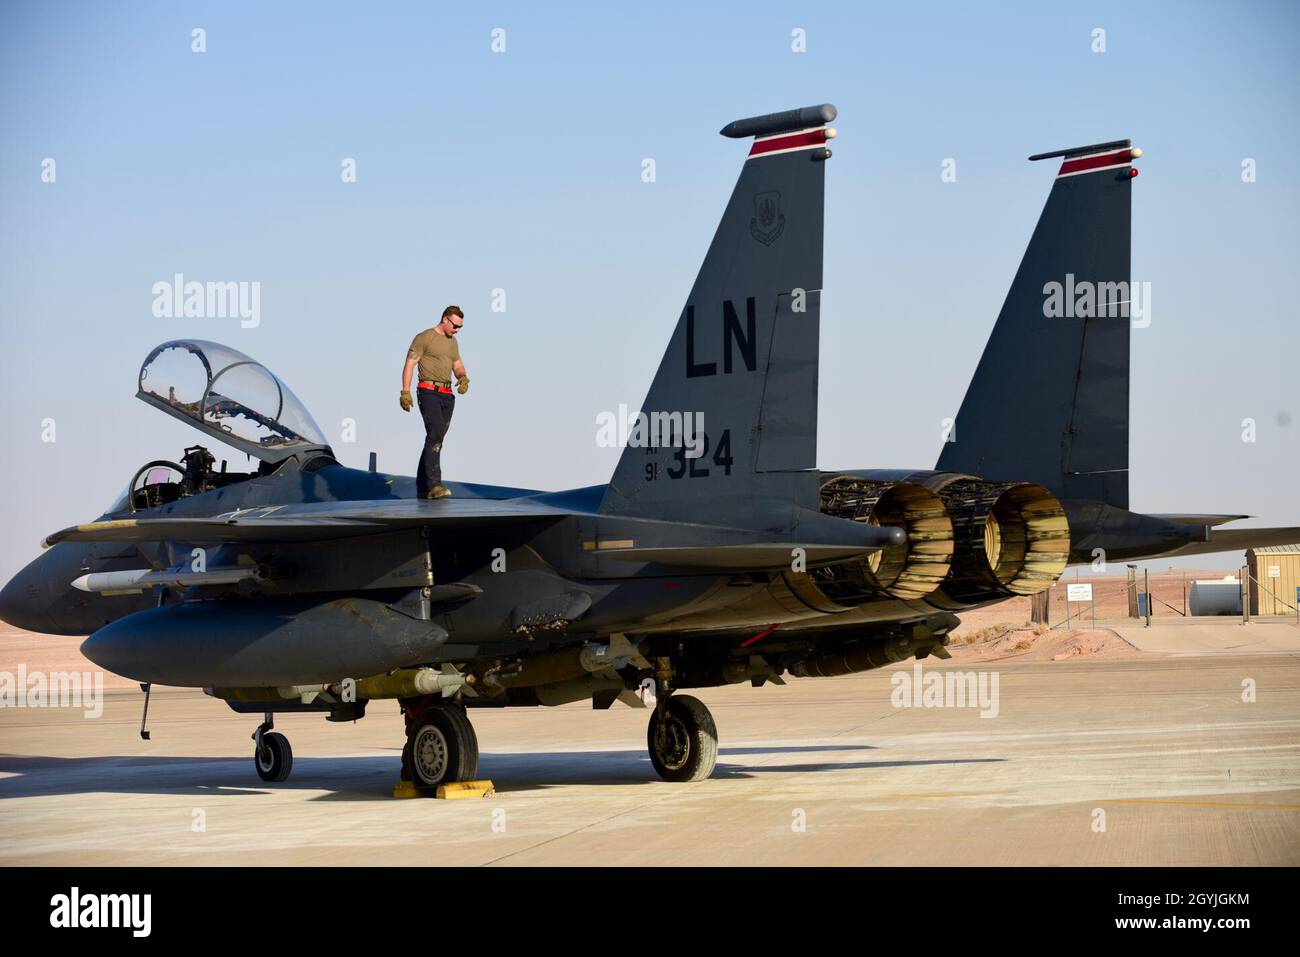 U.S. Air Force Staff Sgt. Zackary Suttles, a crew chief with the 378th Expeditionary Maintenance Squadron, conducts an inspection on an F-15E Strike Eagle at Prince Sultan Air Base, Kingdom of Saudi Arabia, Jan. 4, 2020. The F-15E Strike Eagle is a dual-role fighter designed to perform air-to-air and air-to-ground missions, demonstrating U.S. Air Forces Central Commands’ posture to compete, deter, and win against state and non-state actors.  (U.S. Air Force photo by Tech. Sgt. Michael Charles) Stock Photo